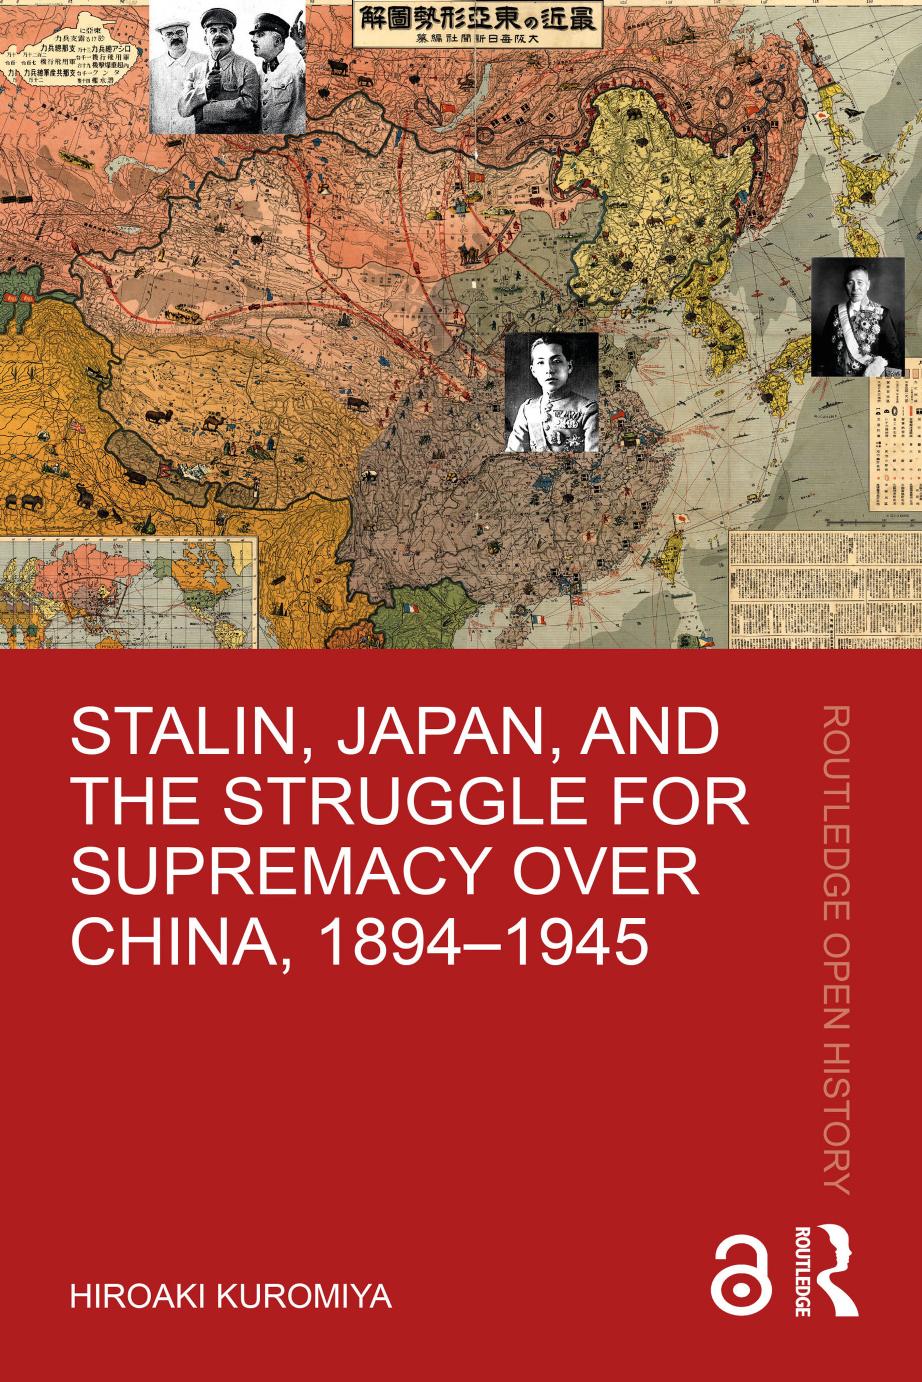 Stalin, Japan, and the Struggle for Supremacy over China, 1894â1945 by Hiroaki Kuromiya